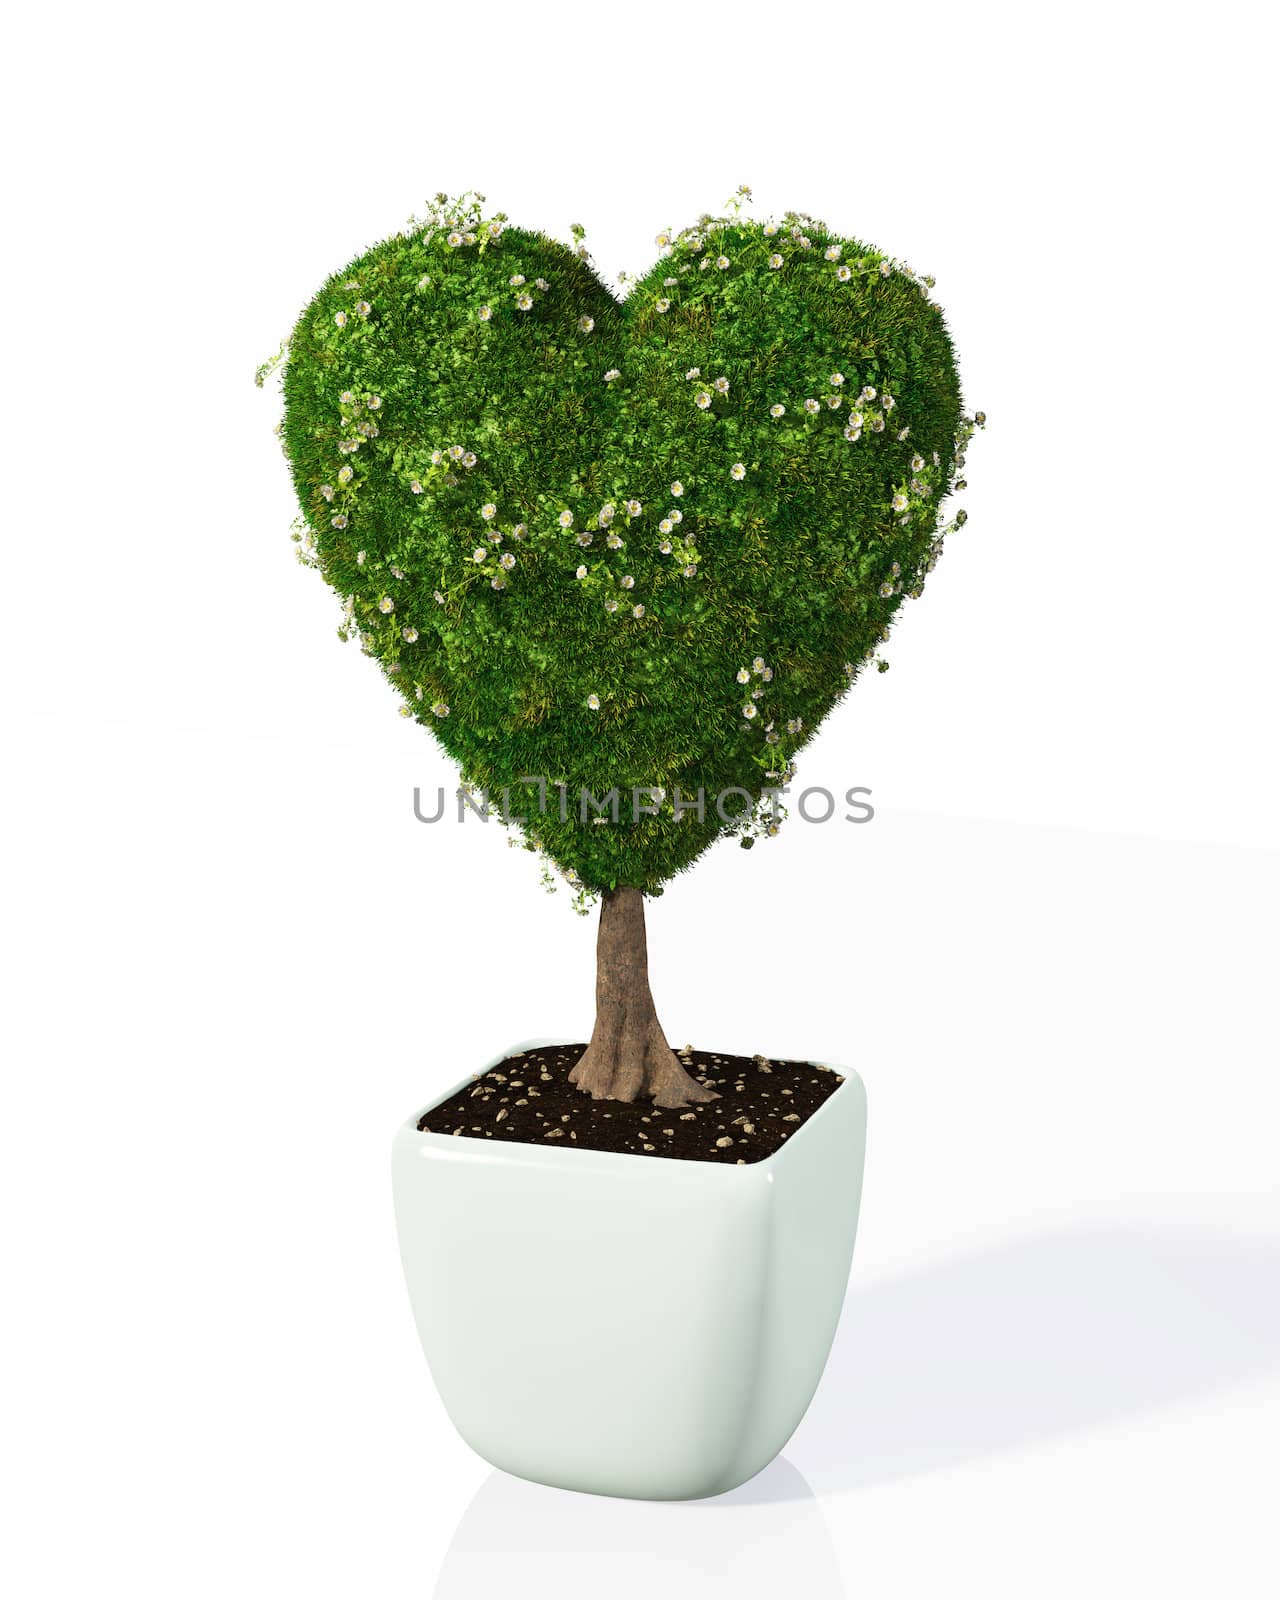 a small plant in the shape of heart planted in a white pot is fully covered by grass and flowers, on a white background